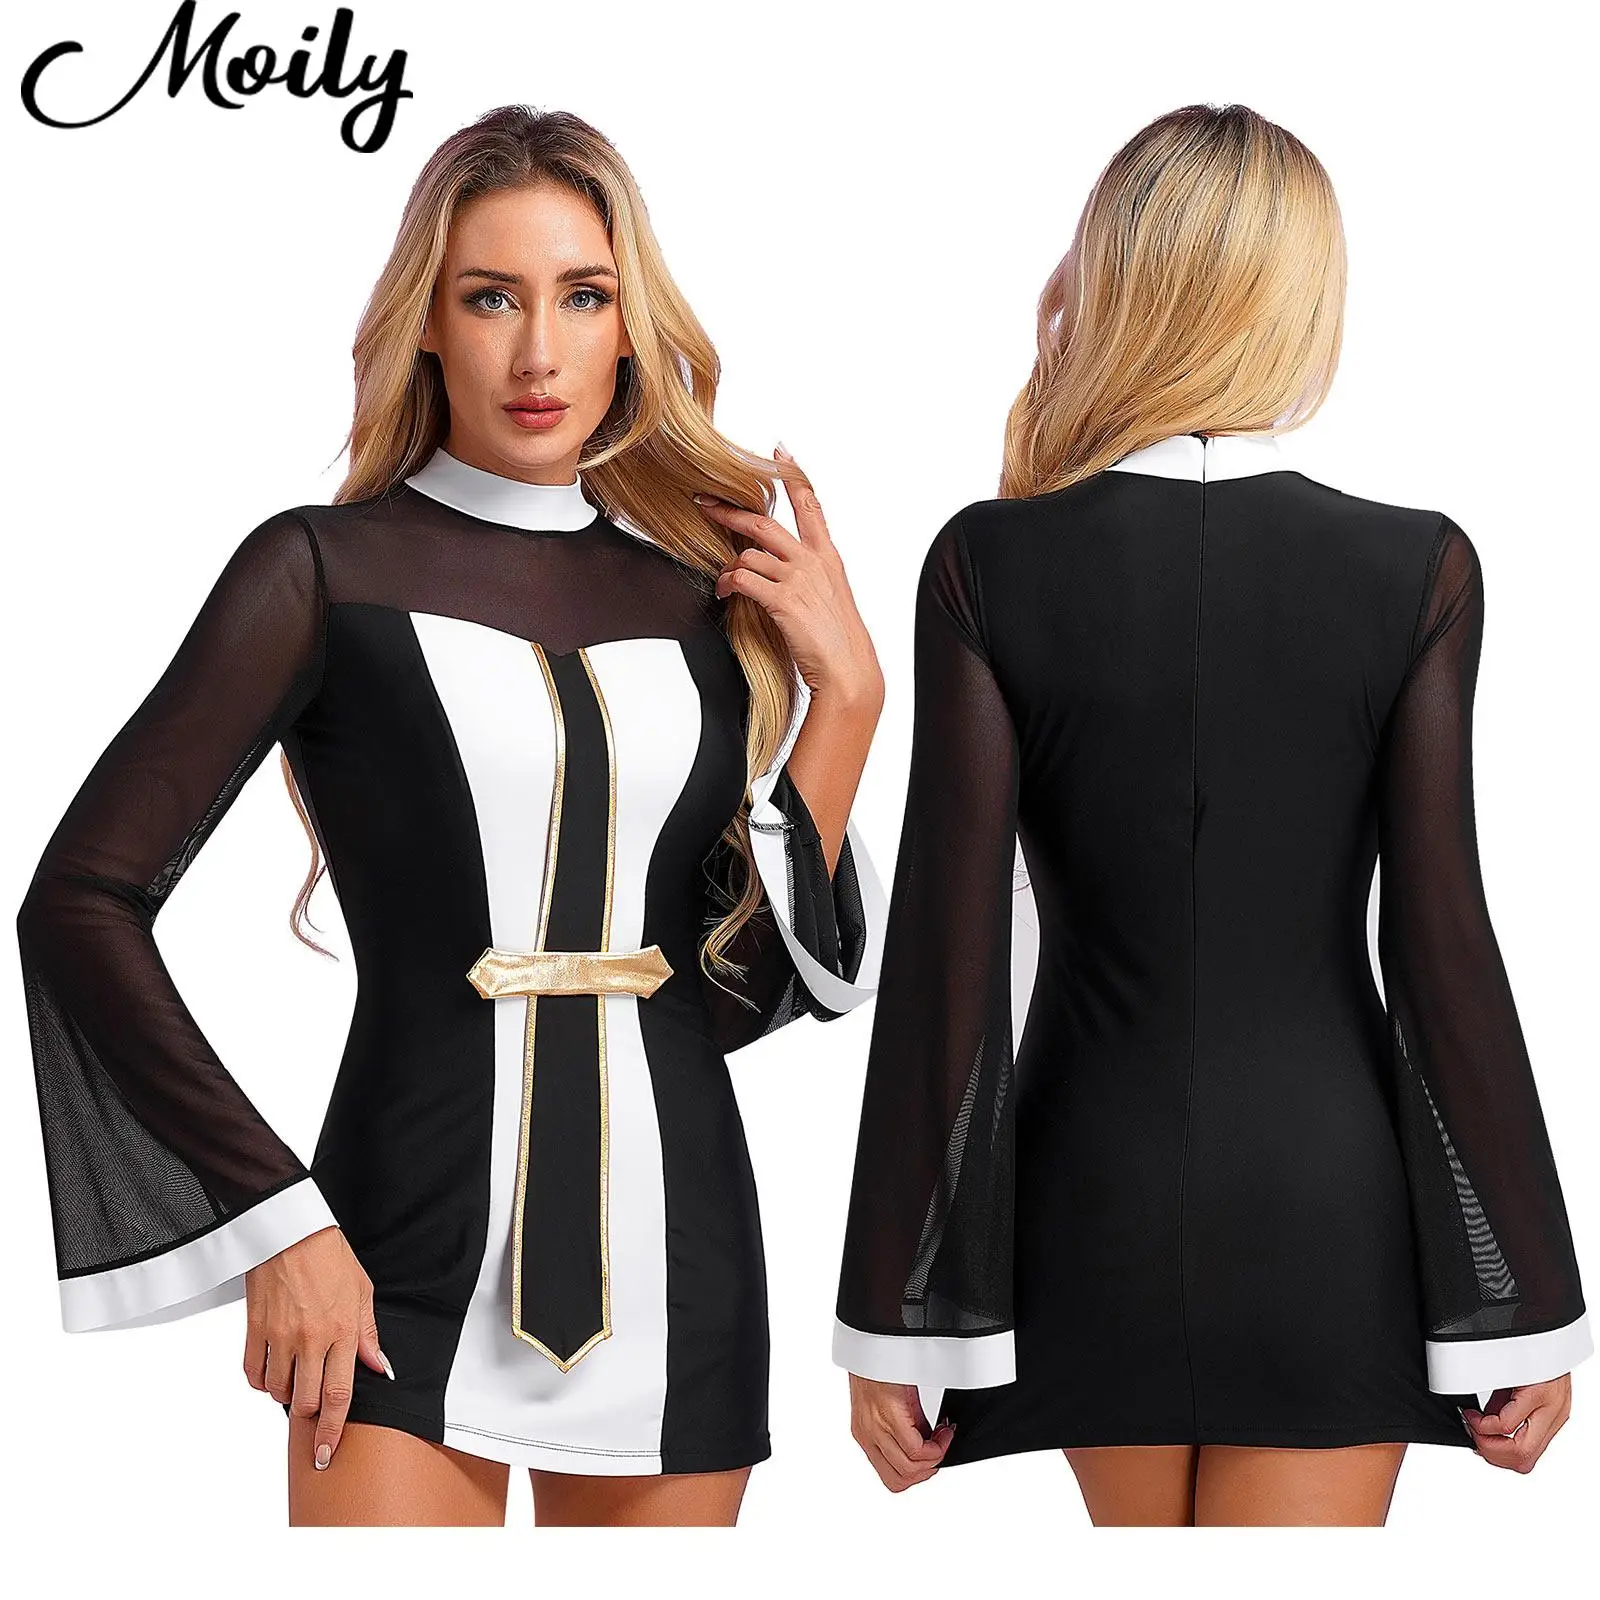 

Womens Halloween Twisted Sister Nun Cosplay Costumes Mock Neck Flared Sleeve Cross Contrast Mini Dress for Dress-Up Party